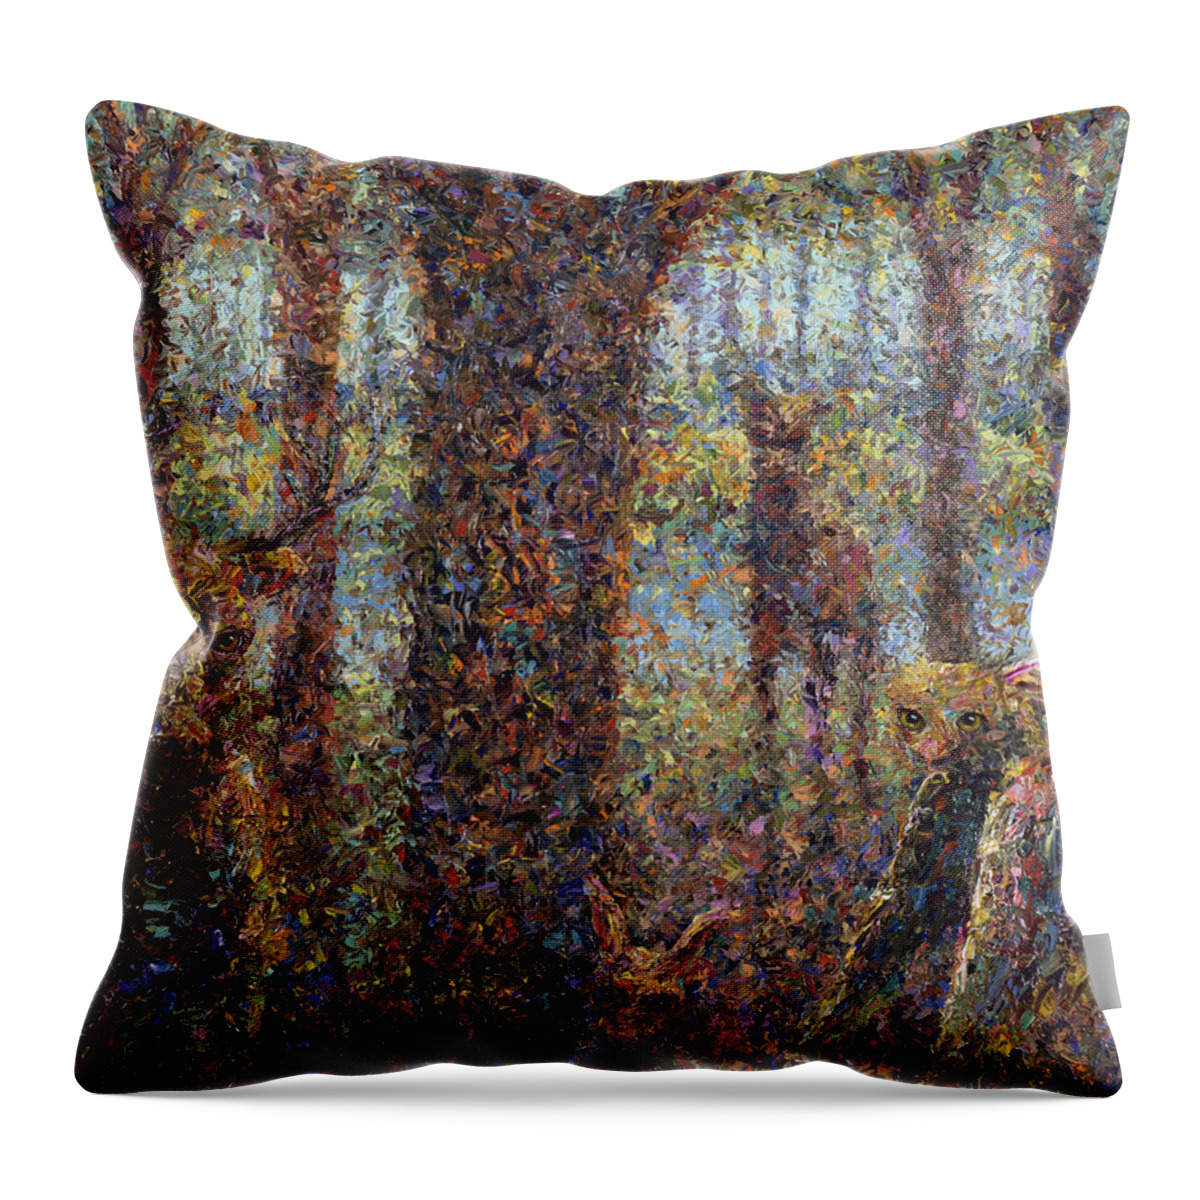 Animals Throw Pillow featuring the painting Encounter by James W Johnson